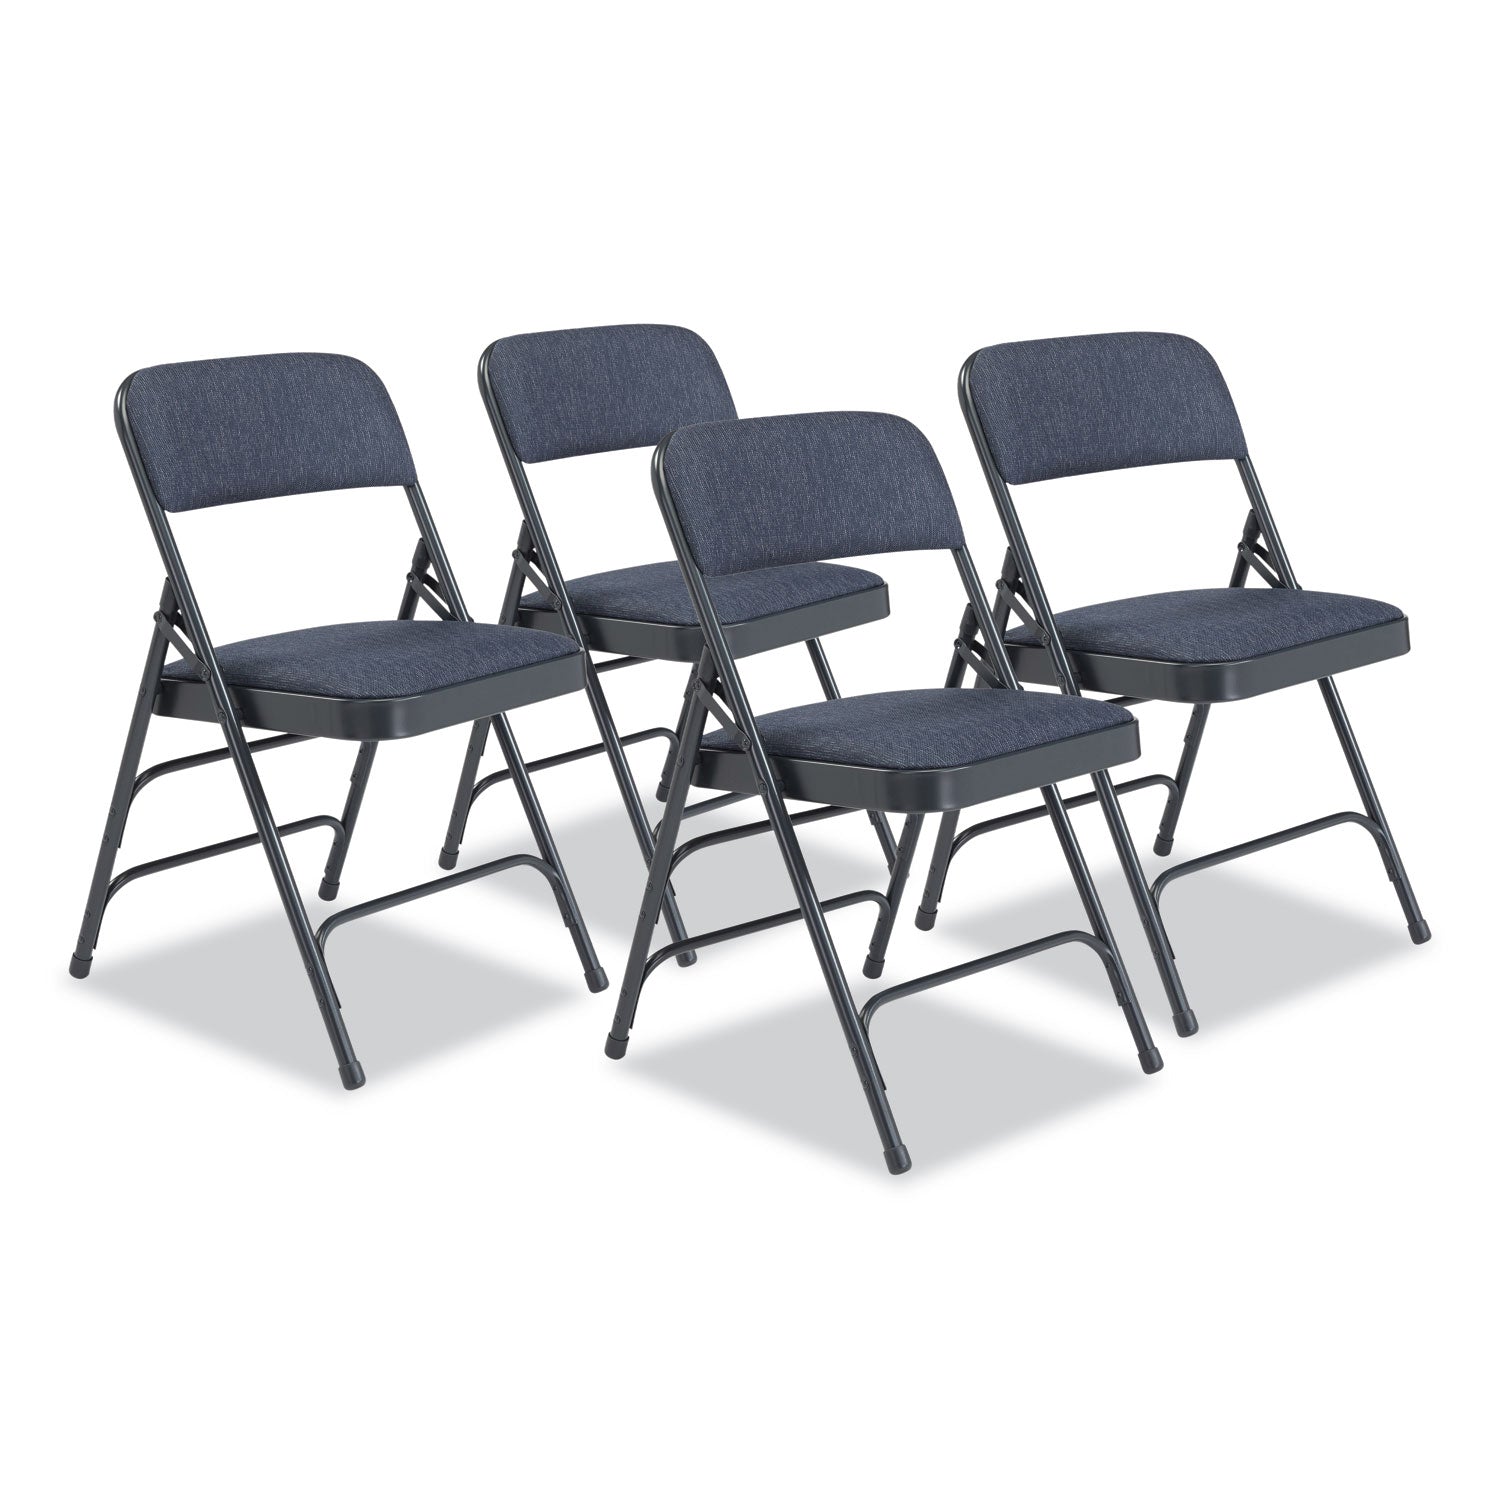 2300-series-deluxe-fabric-upholstered-triple-brace-folding-chair-supports-500-lb-imperial-blue-4-ct-ships-in-1-3-bus-days_nps2304 - 1